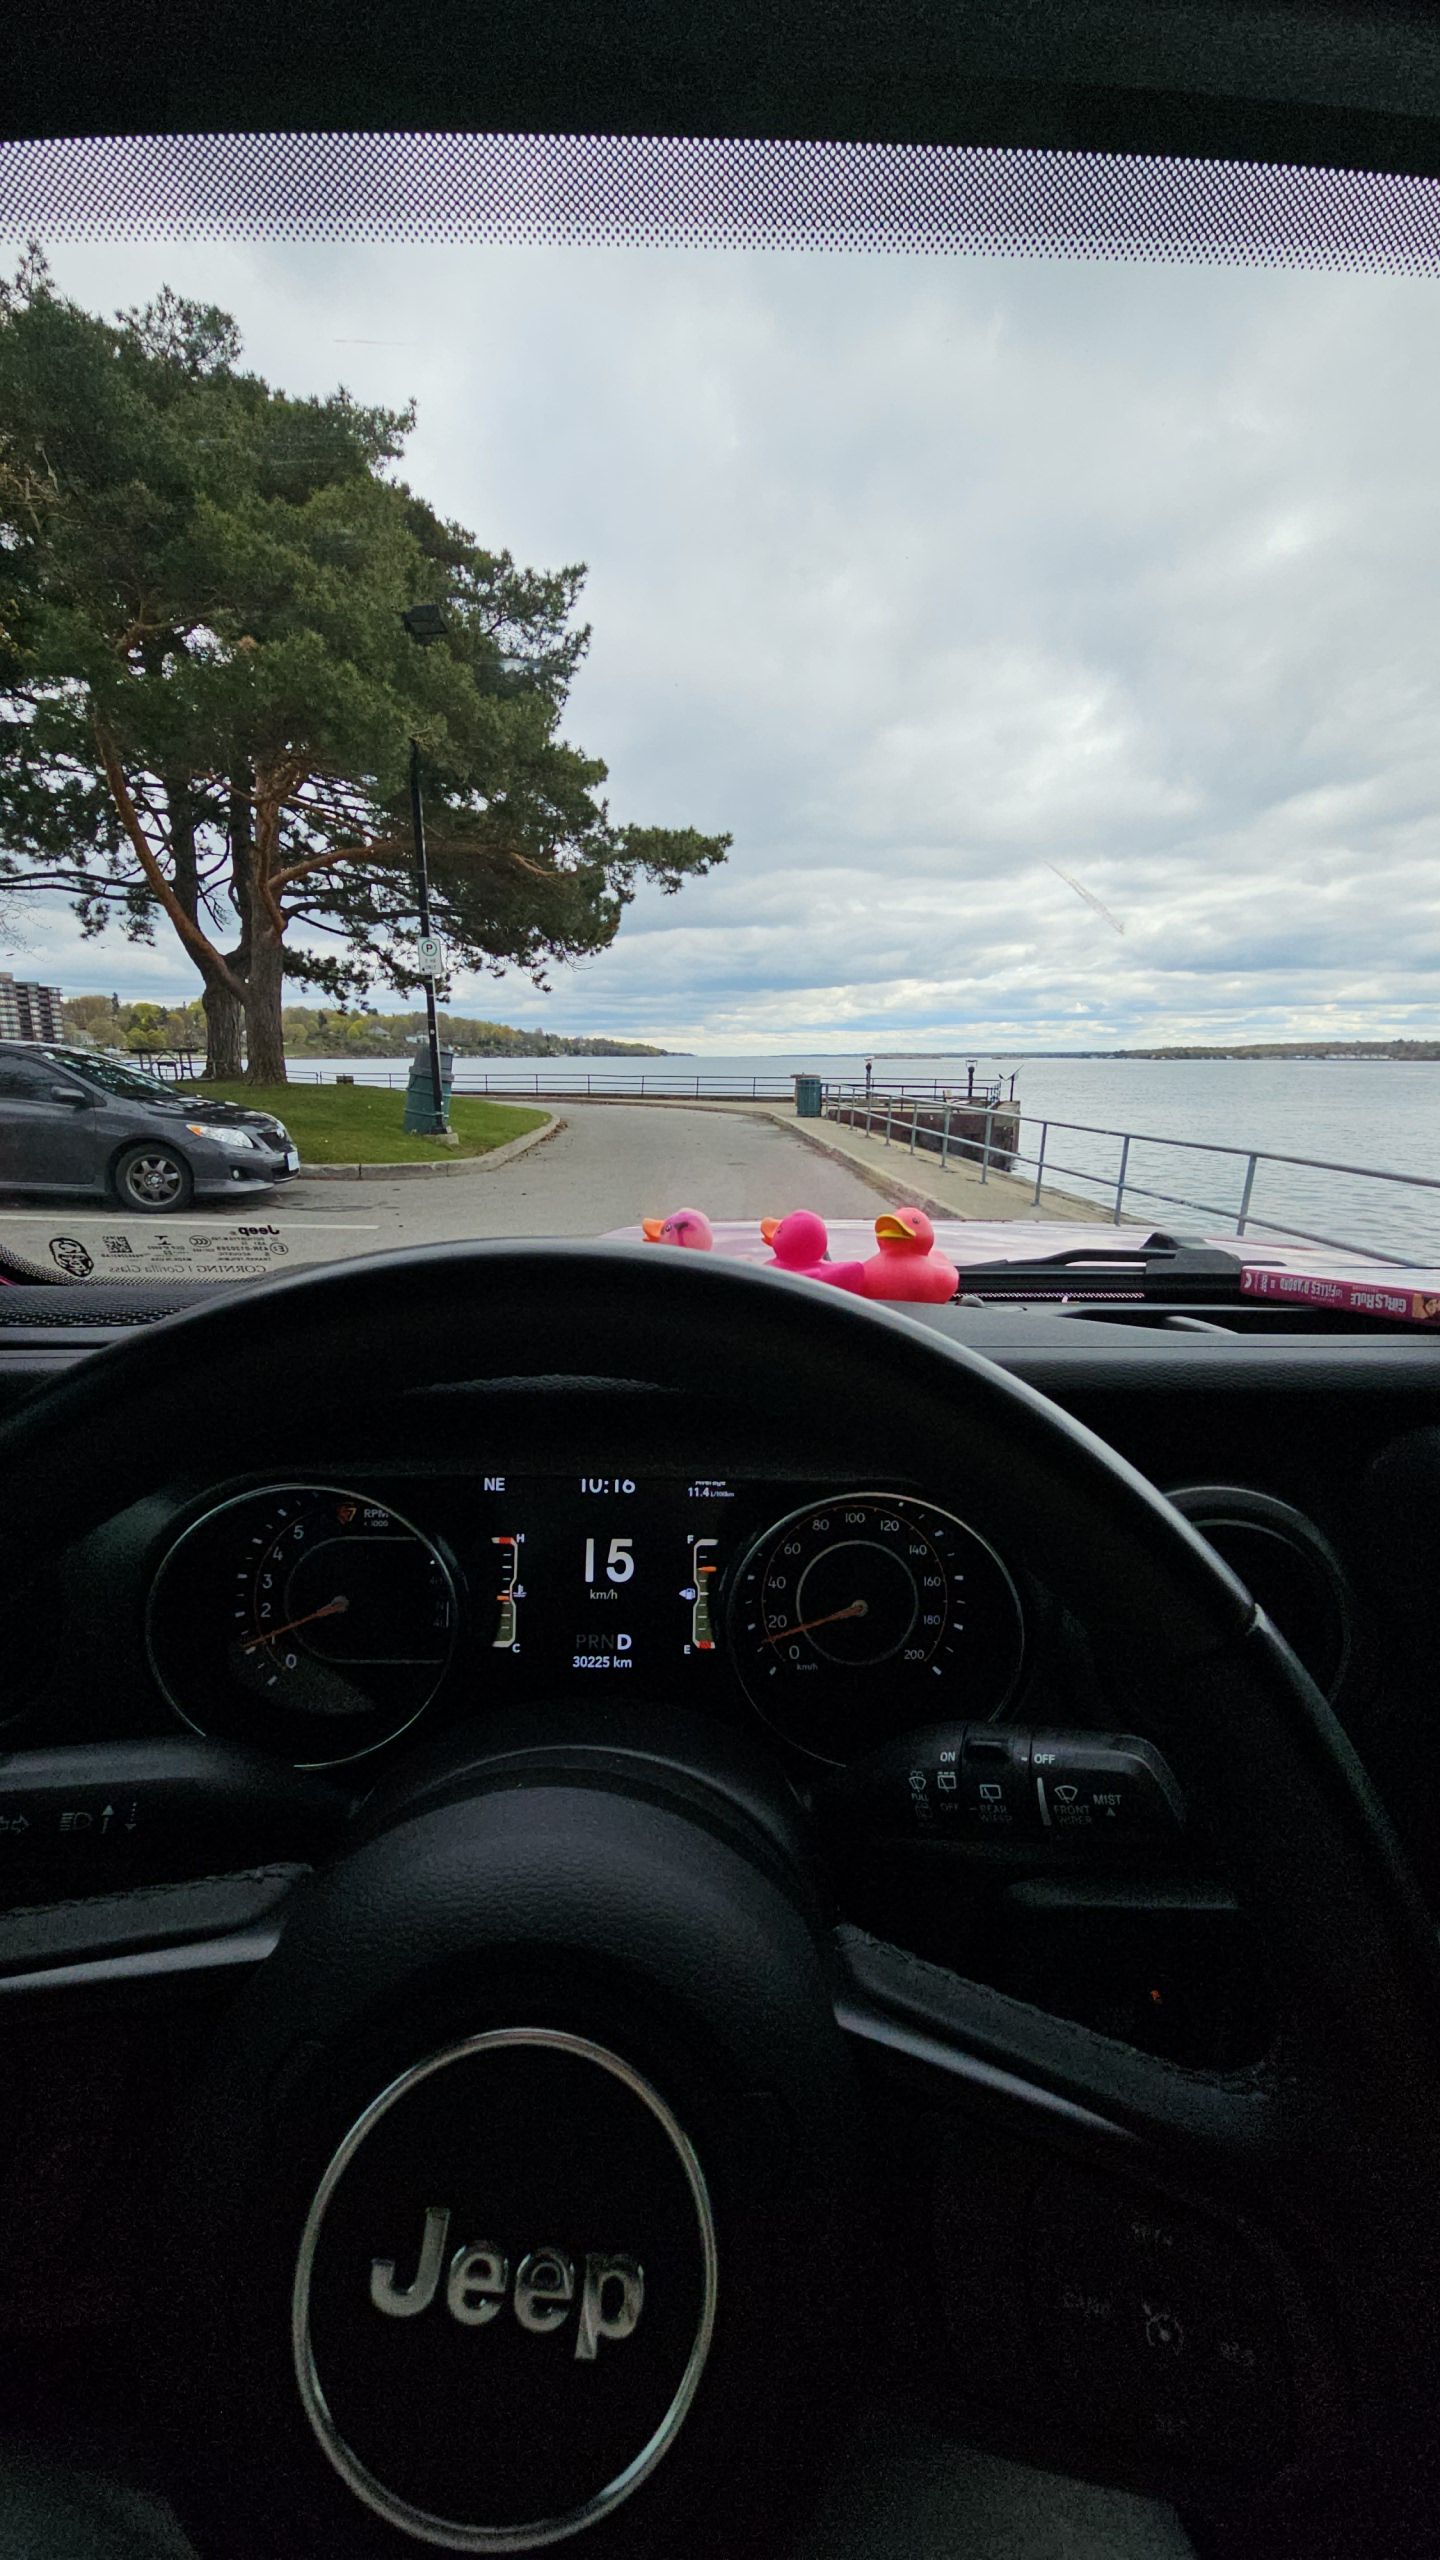 a car dashboard with pink rubber ducks on it